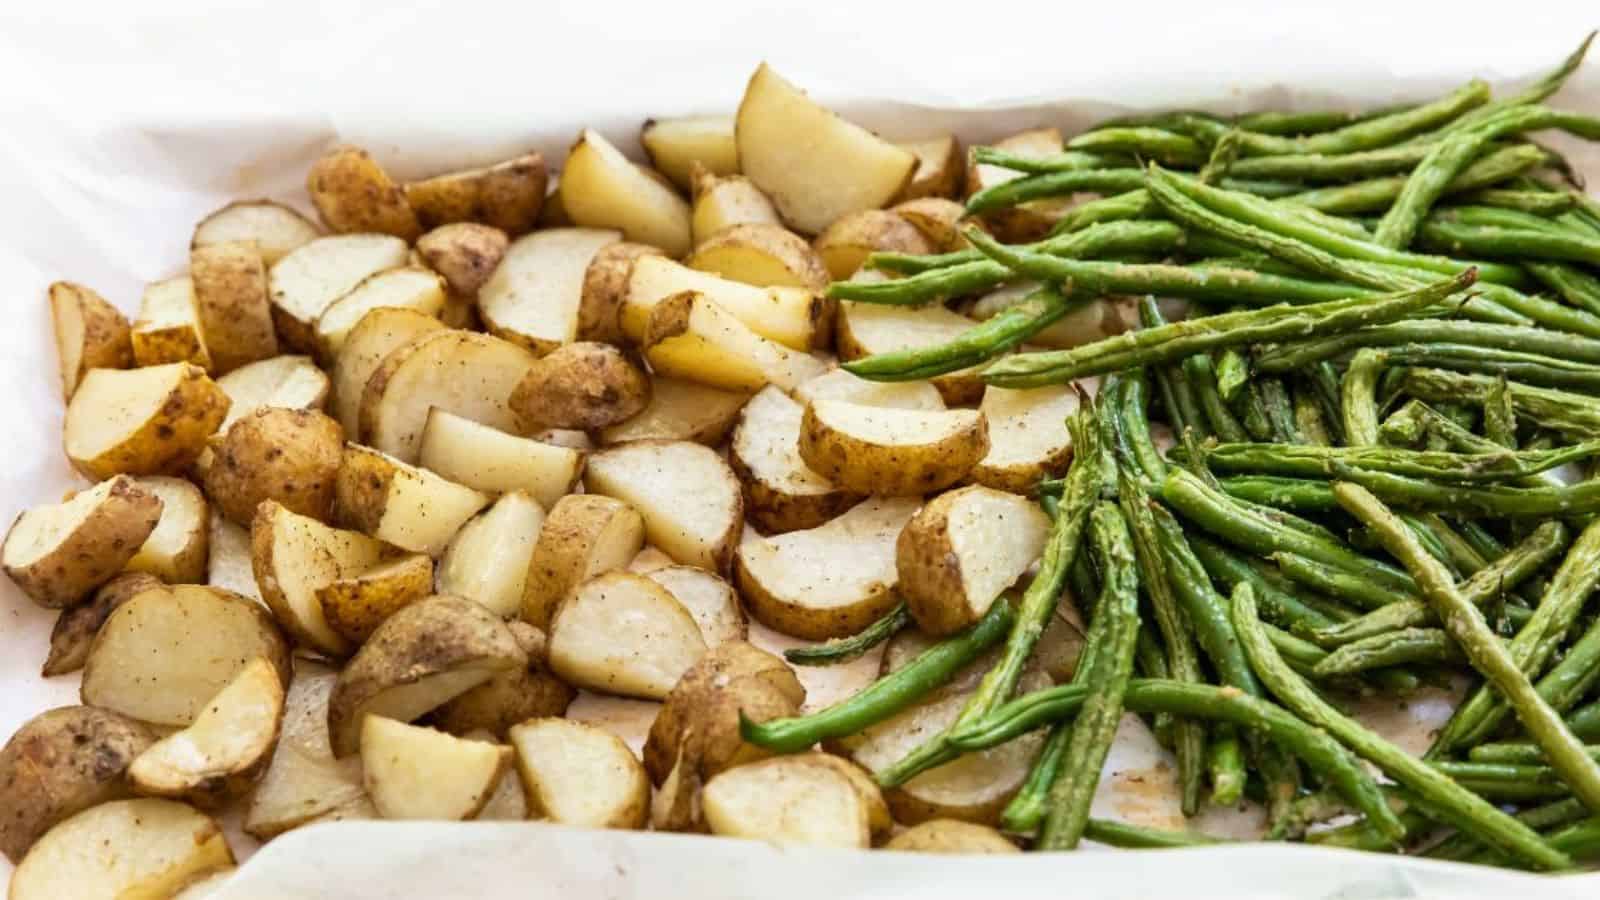 Roasted Potatoes and Green Beans with parsley, salt, and pepper.